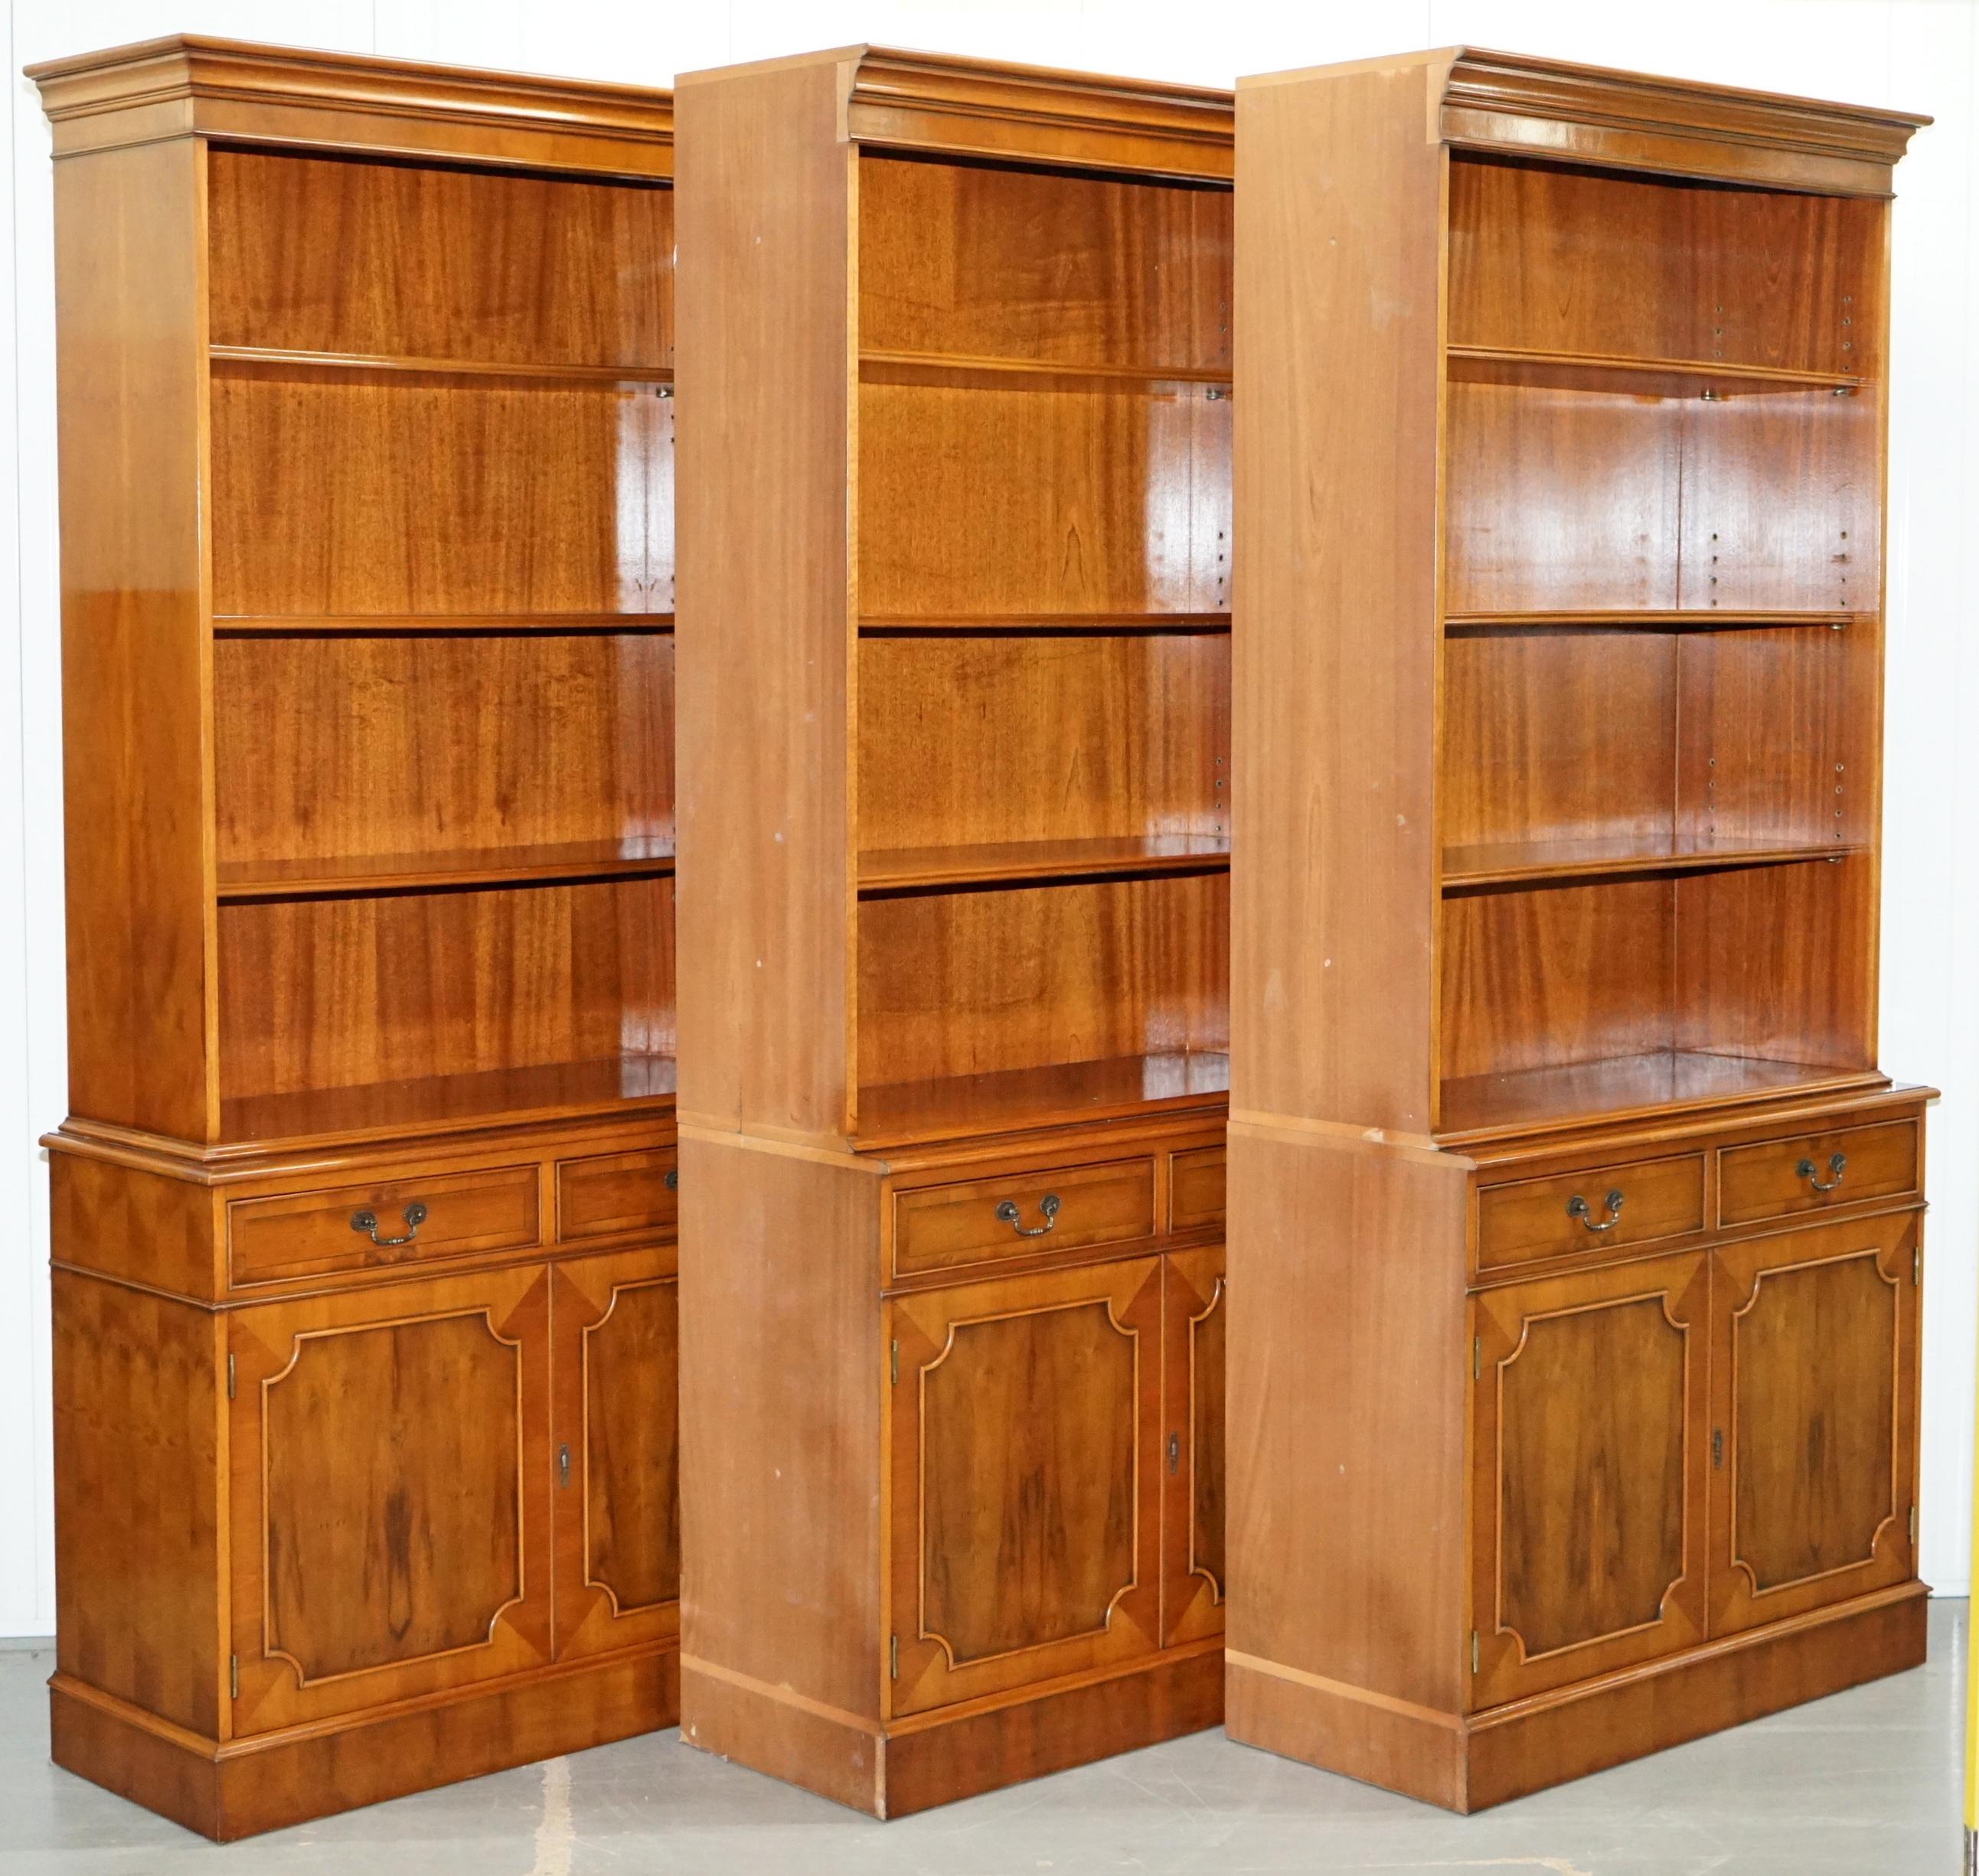 Stunning FLAMED YEW WOOD BRADLEY ENGLAND TRIPLE BANK LiBRARY BOOKCASE CUPBOARD 12